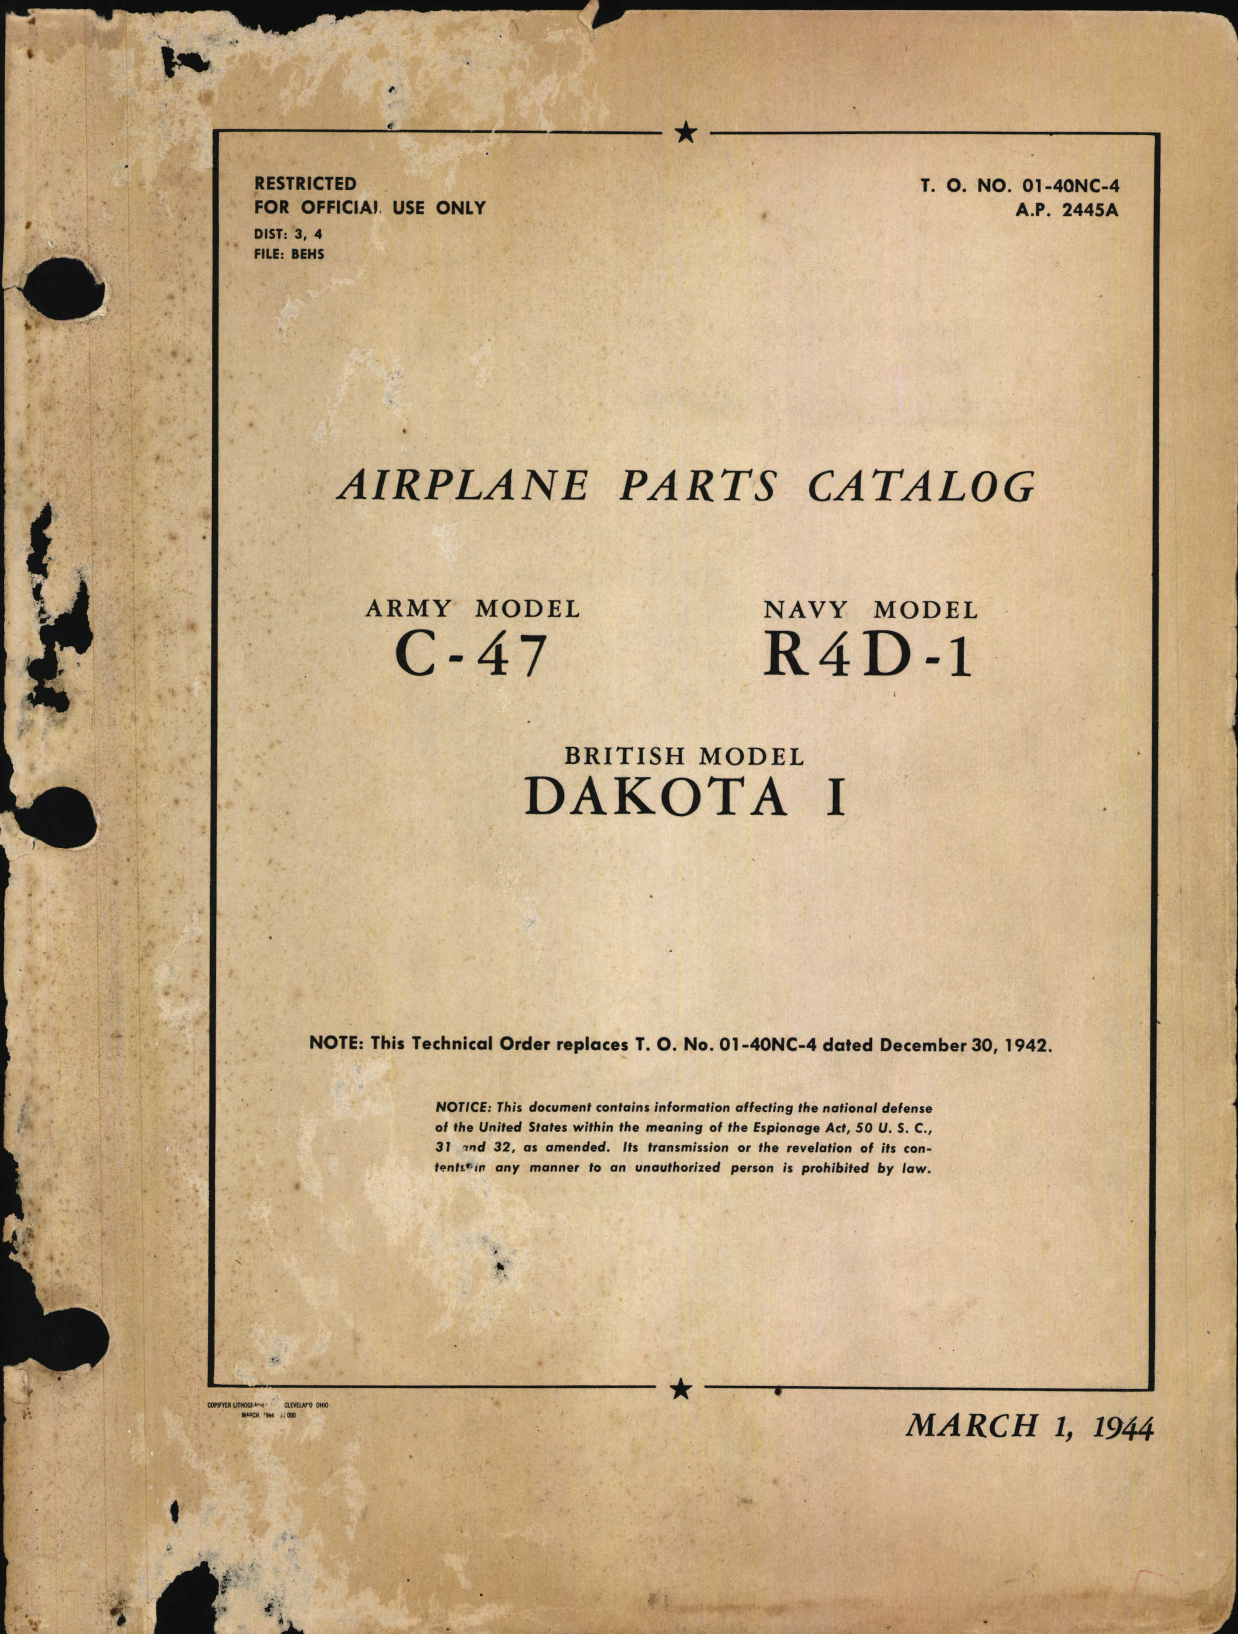 Sample page 1 from AirCorps Library document: Parts Catalog for C-47, R4D-1, and Dakota I